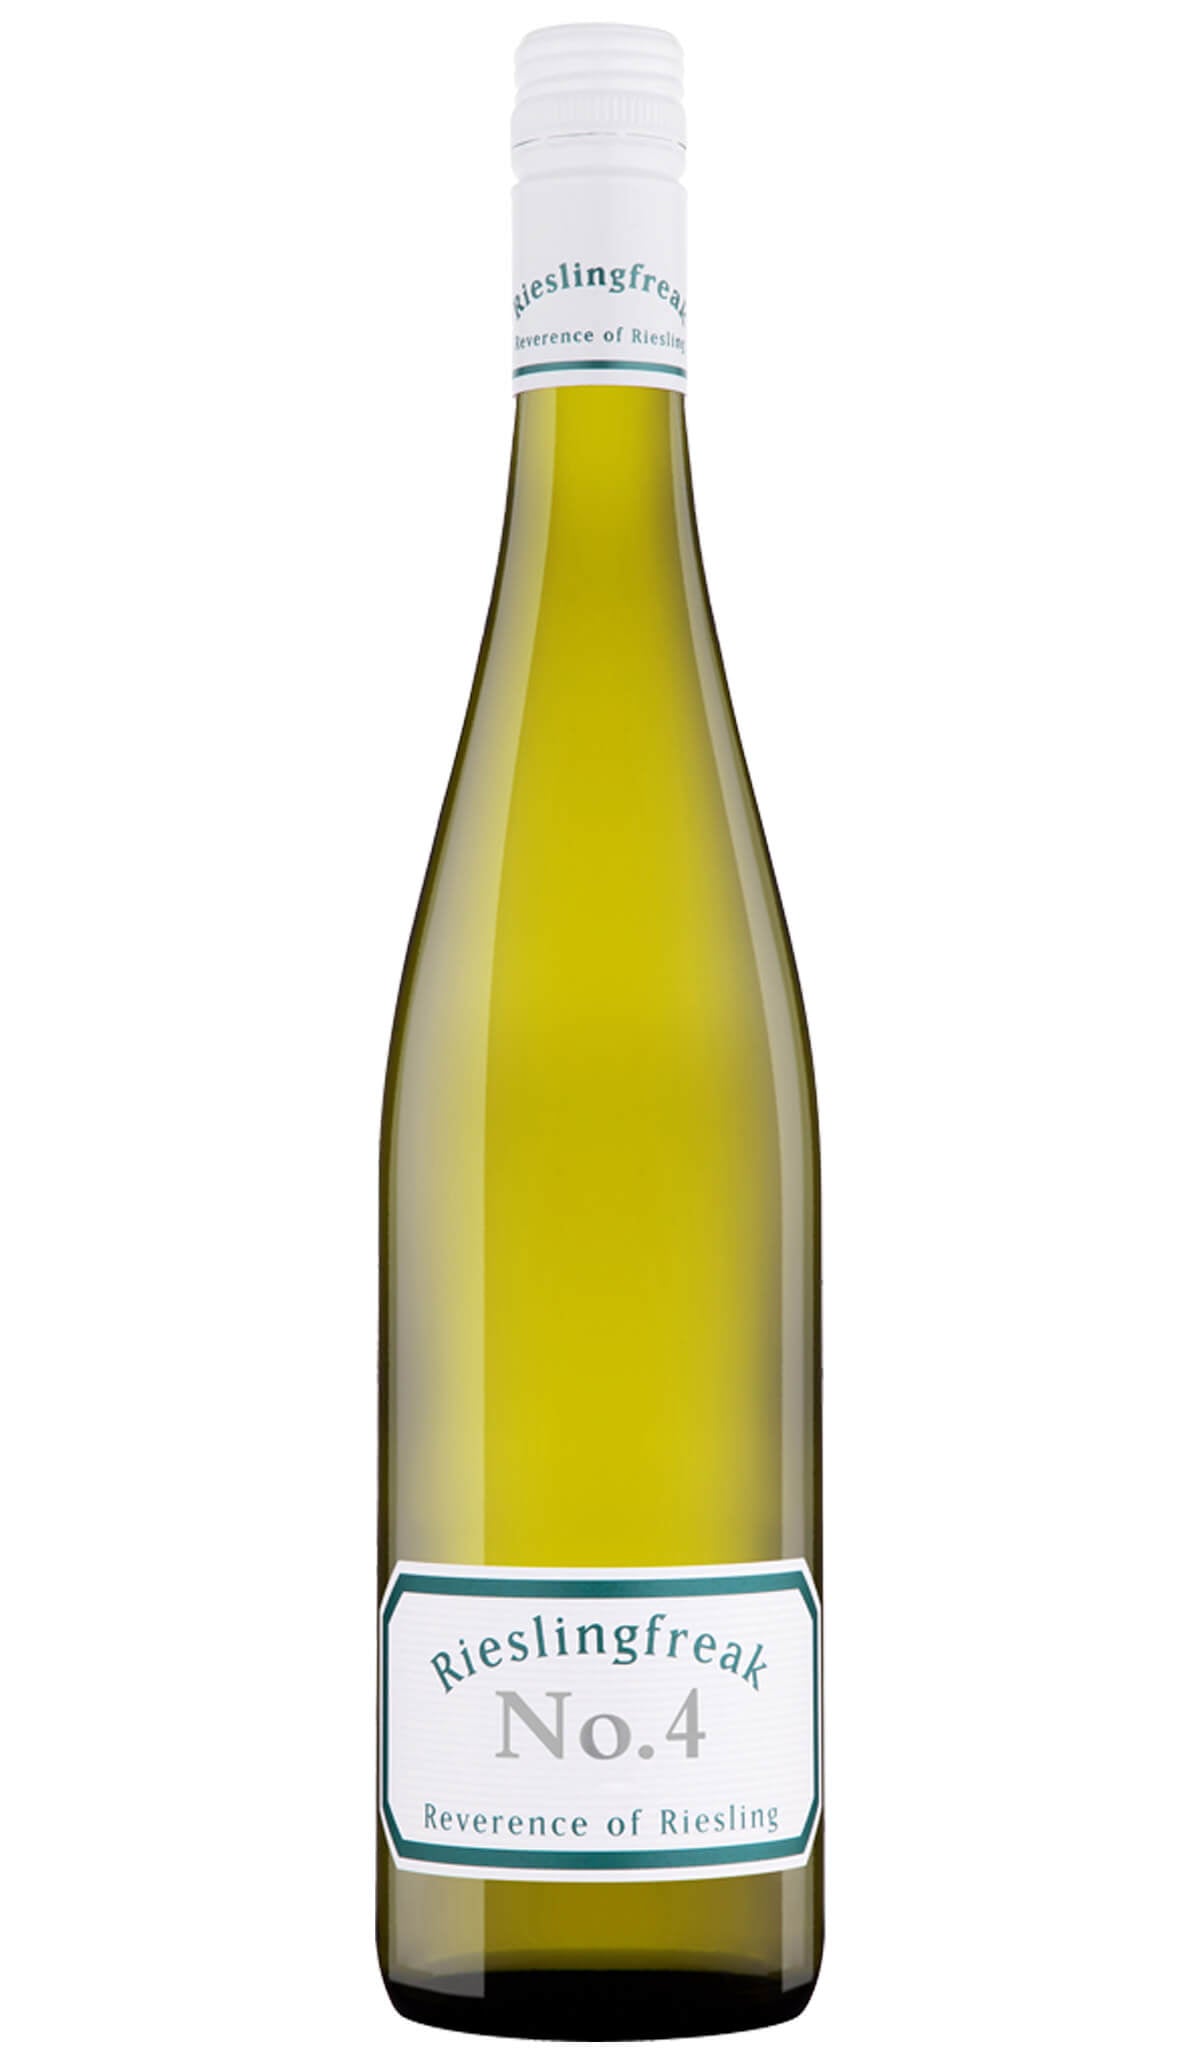 Find out more or buy Rieslingfreak No.4 Eden Valley Riesling 2023 online at Wine Sellers Direct - Australia’s independent liquor specialists.